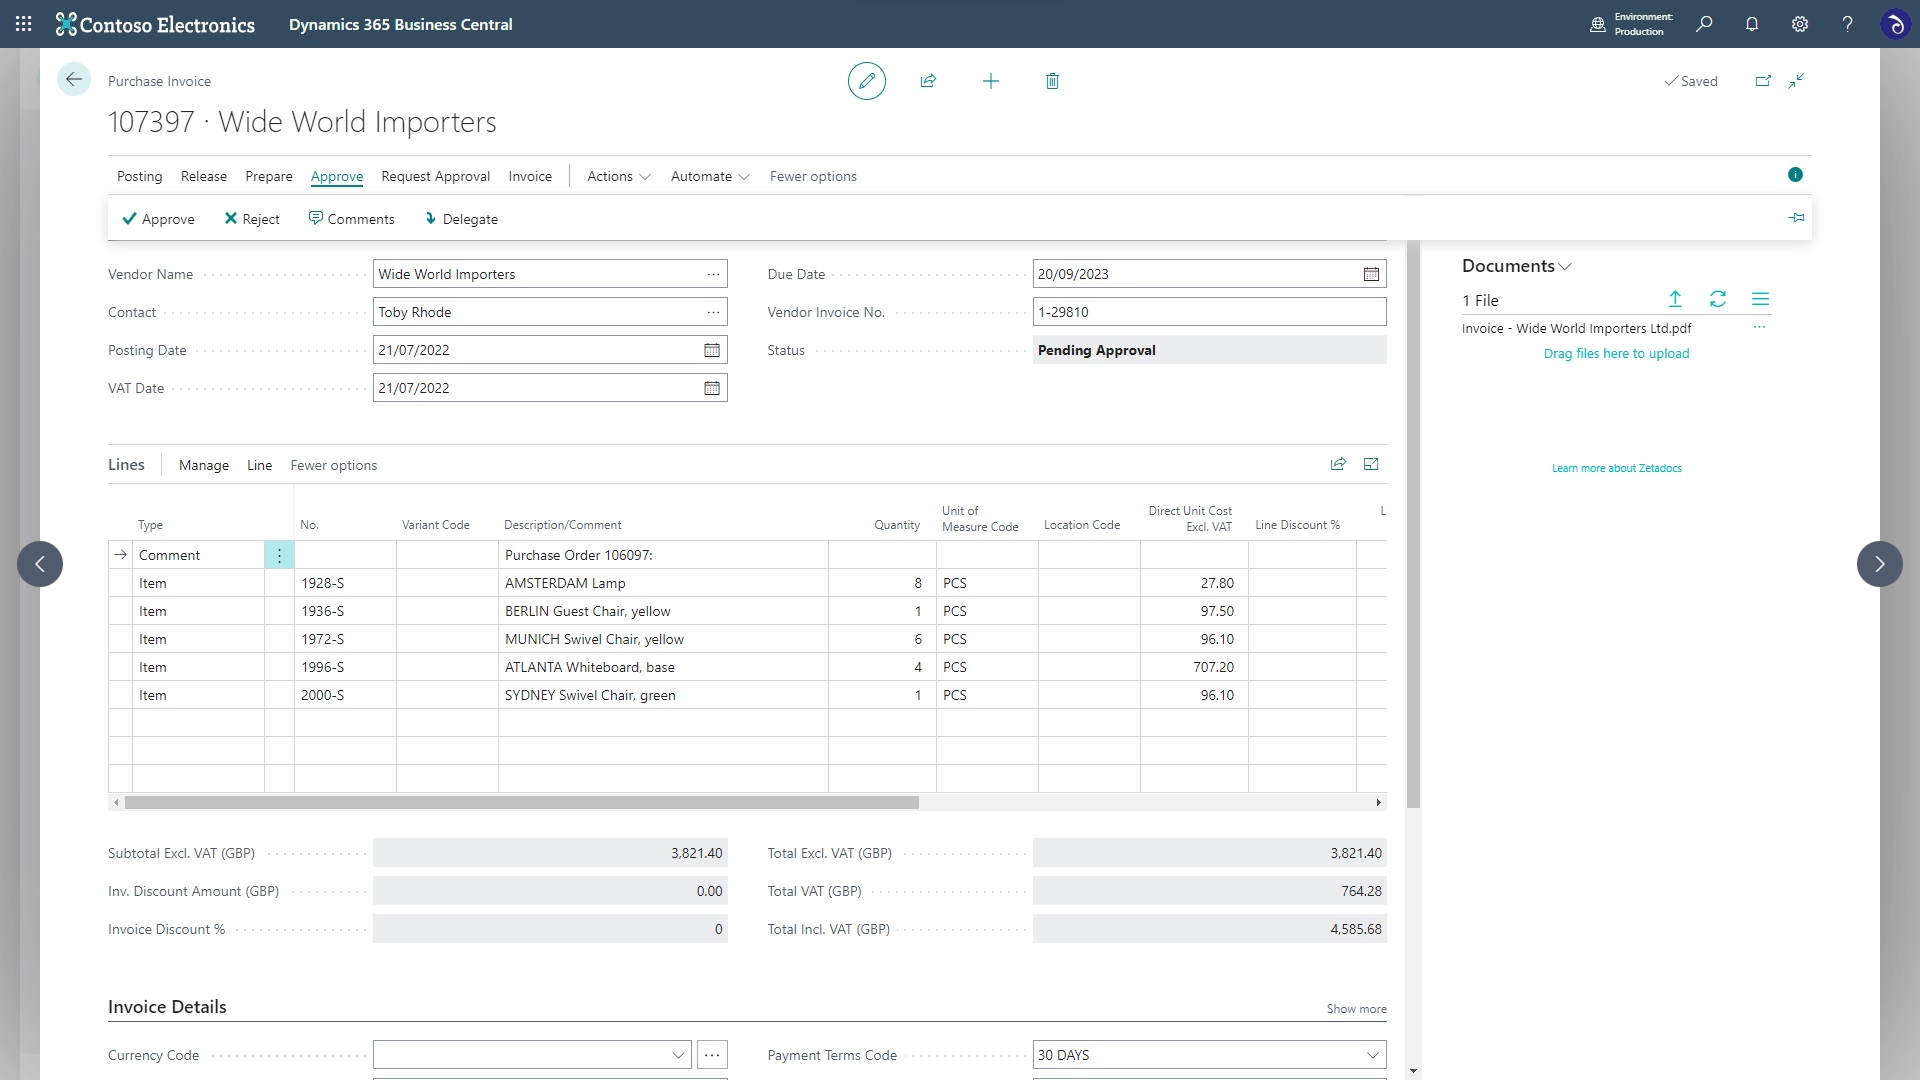 Check original vendor invoices when approving in Business Central